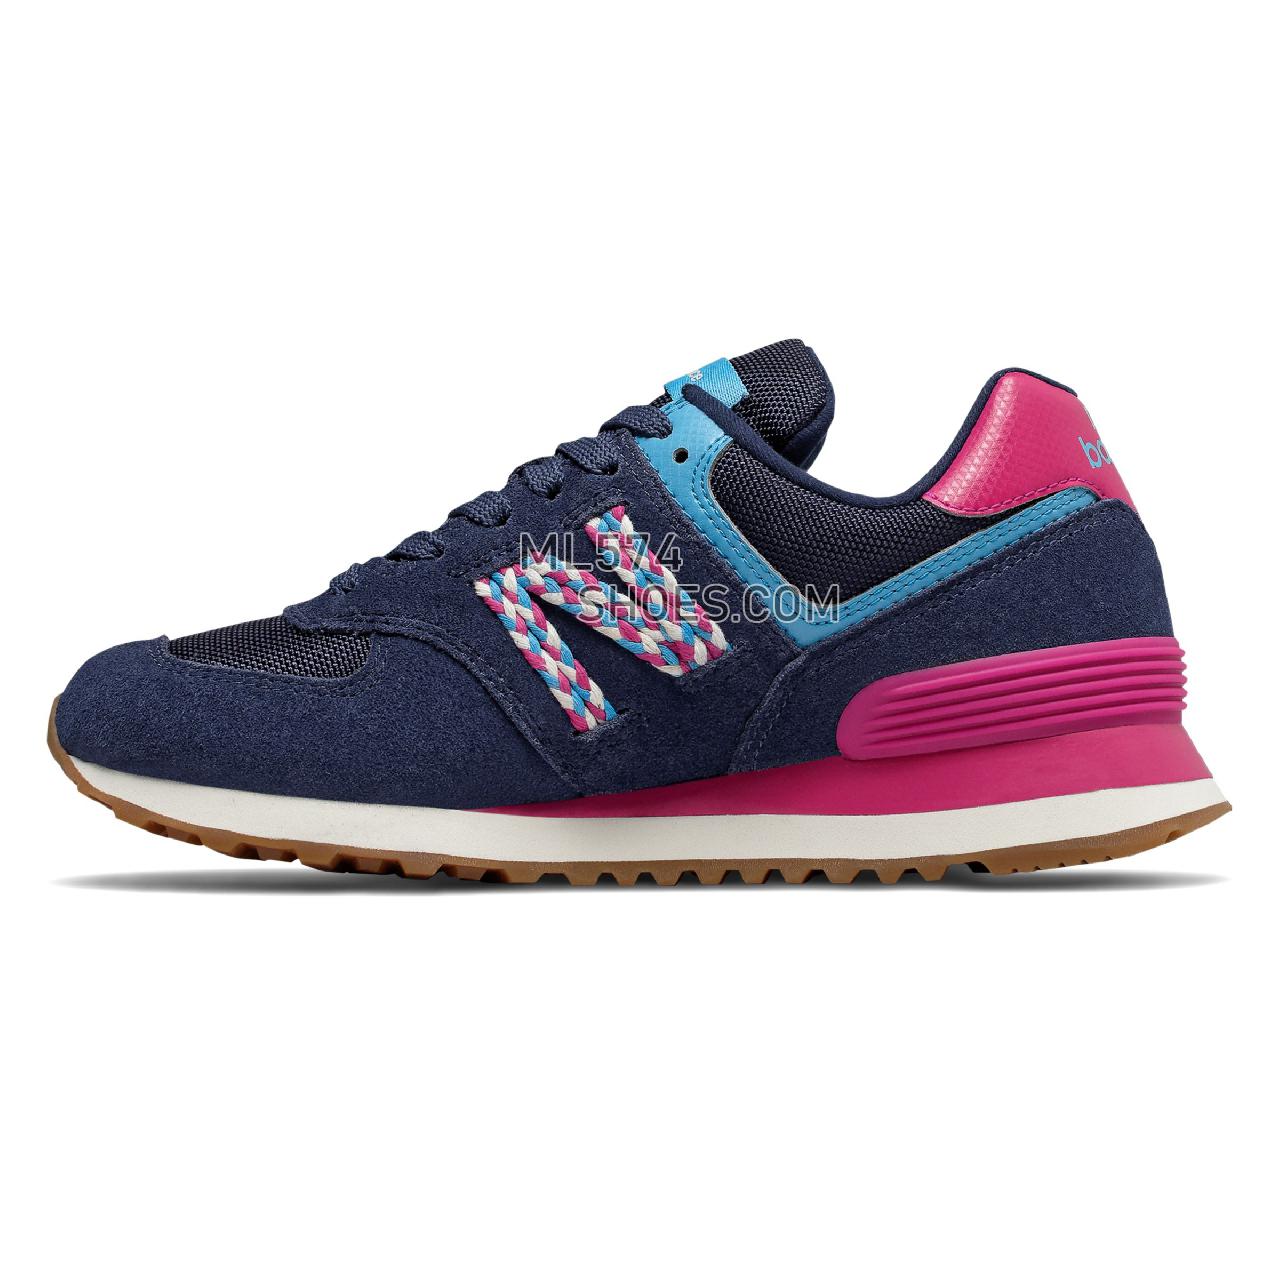 New Balance 574 - Women's Classic Sneakers - Techtonic Blue with Carnival and Cobalt Blue - WL574LDM